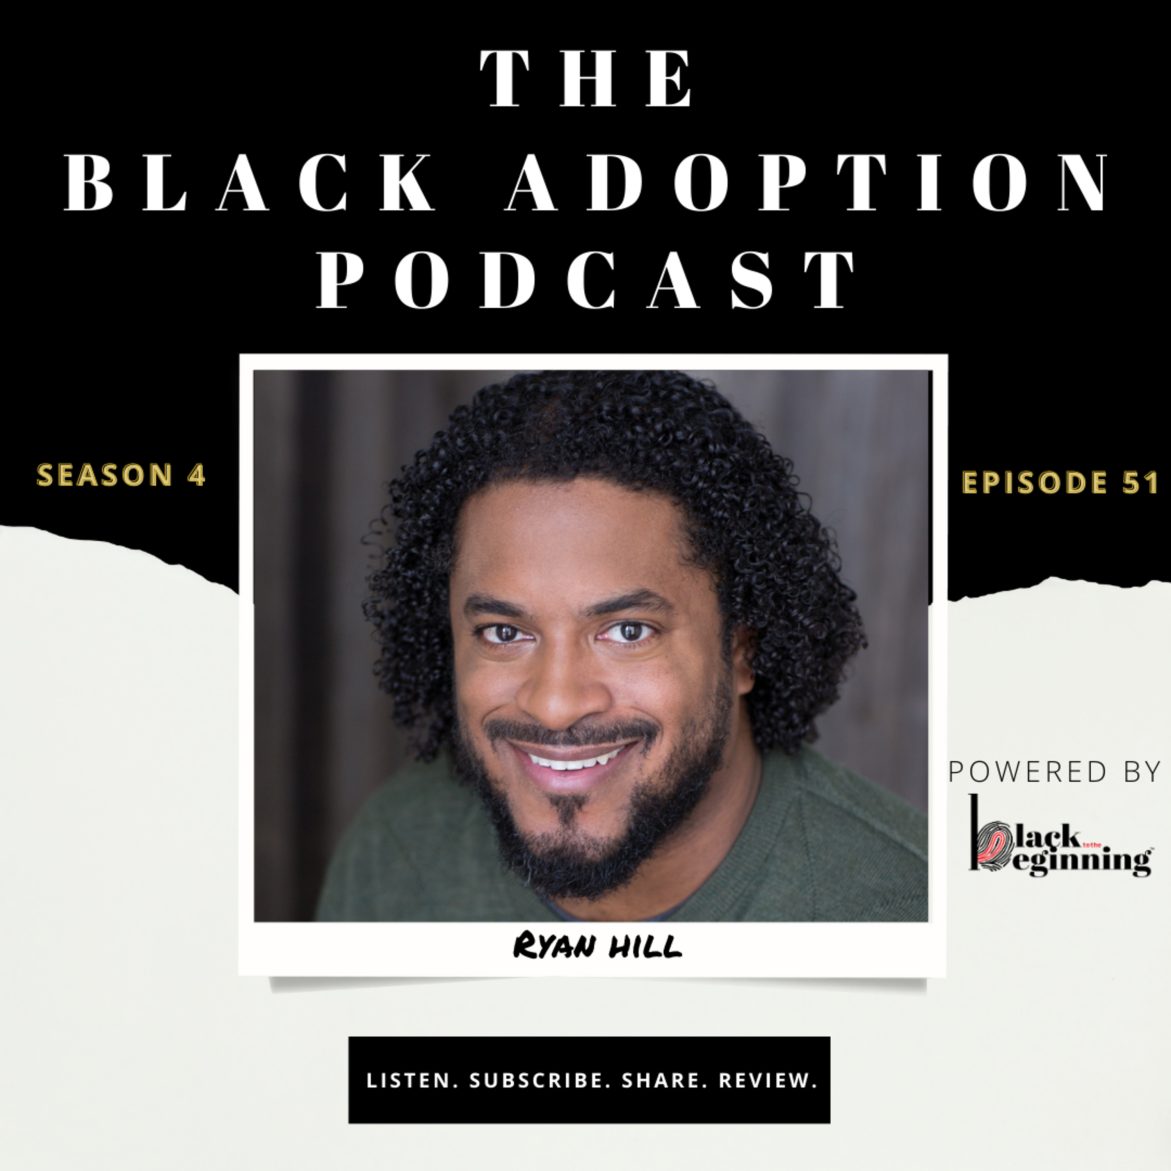 Black Podcasting - S4E51: "If you reveal, you heal" x Ryan Hil